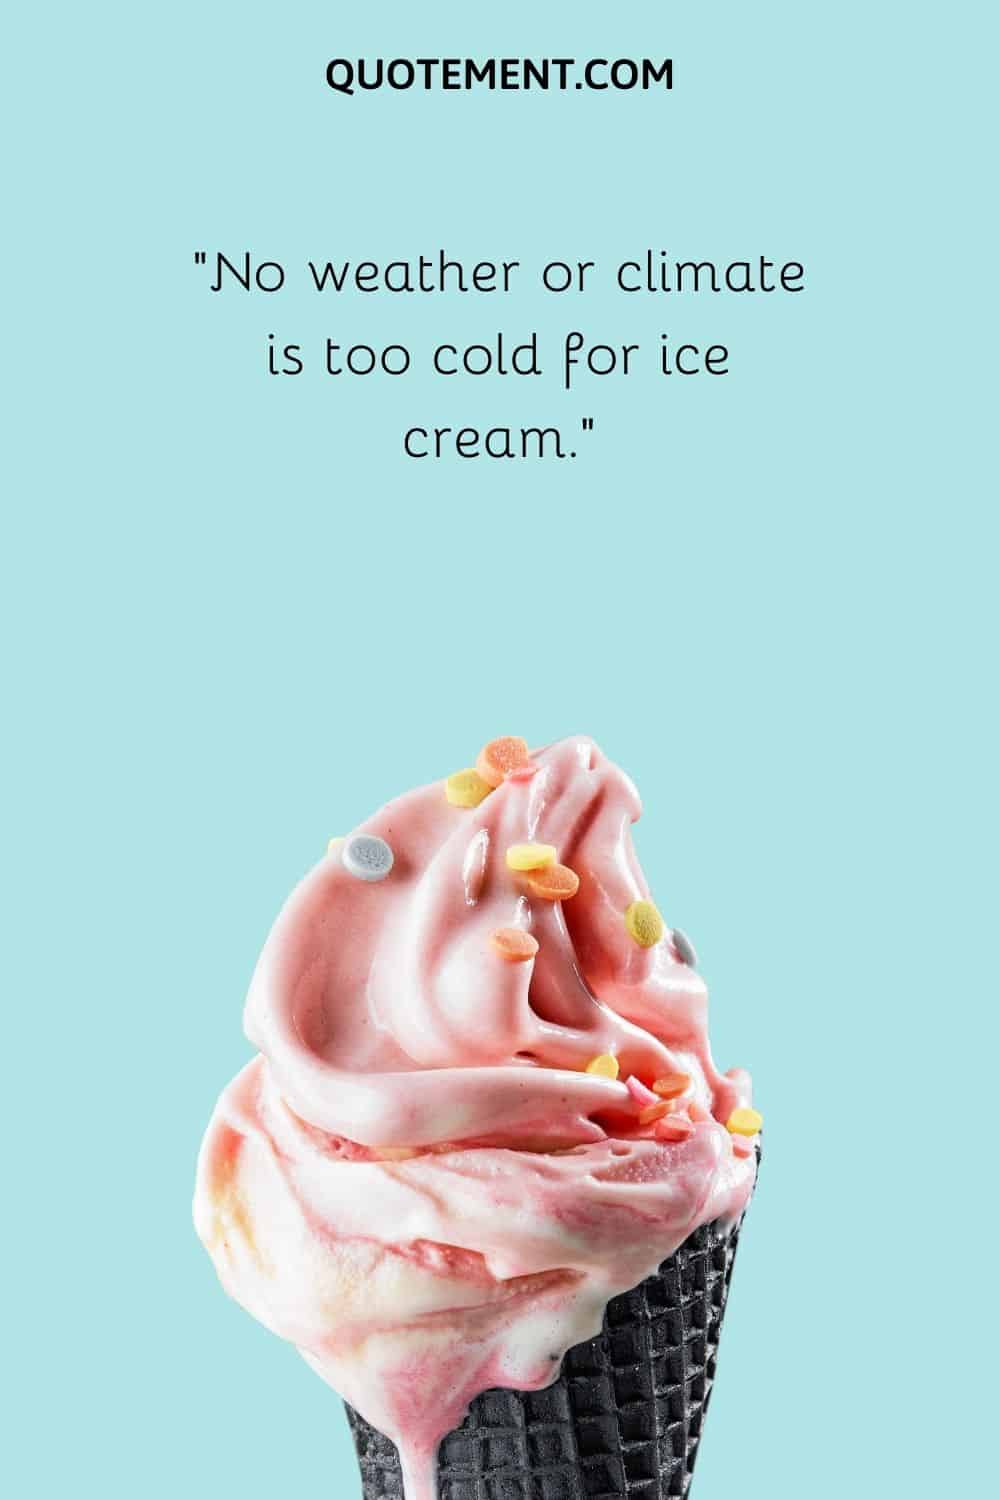 No weather or climate is too cold for ice cream